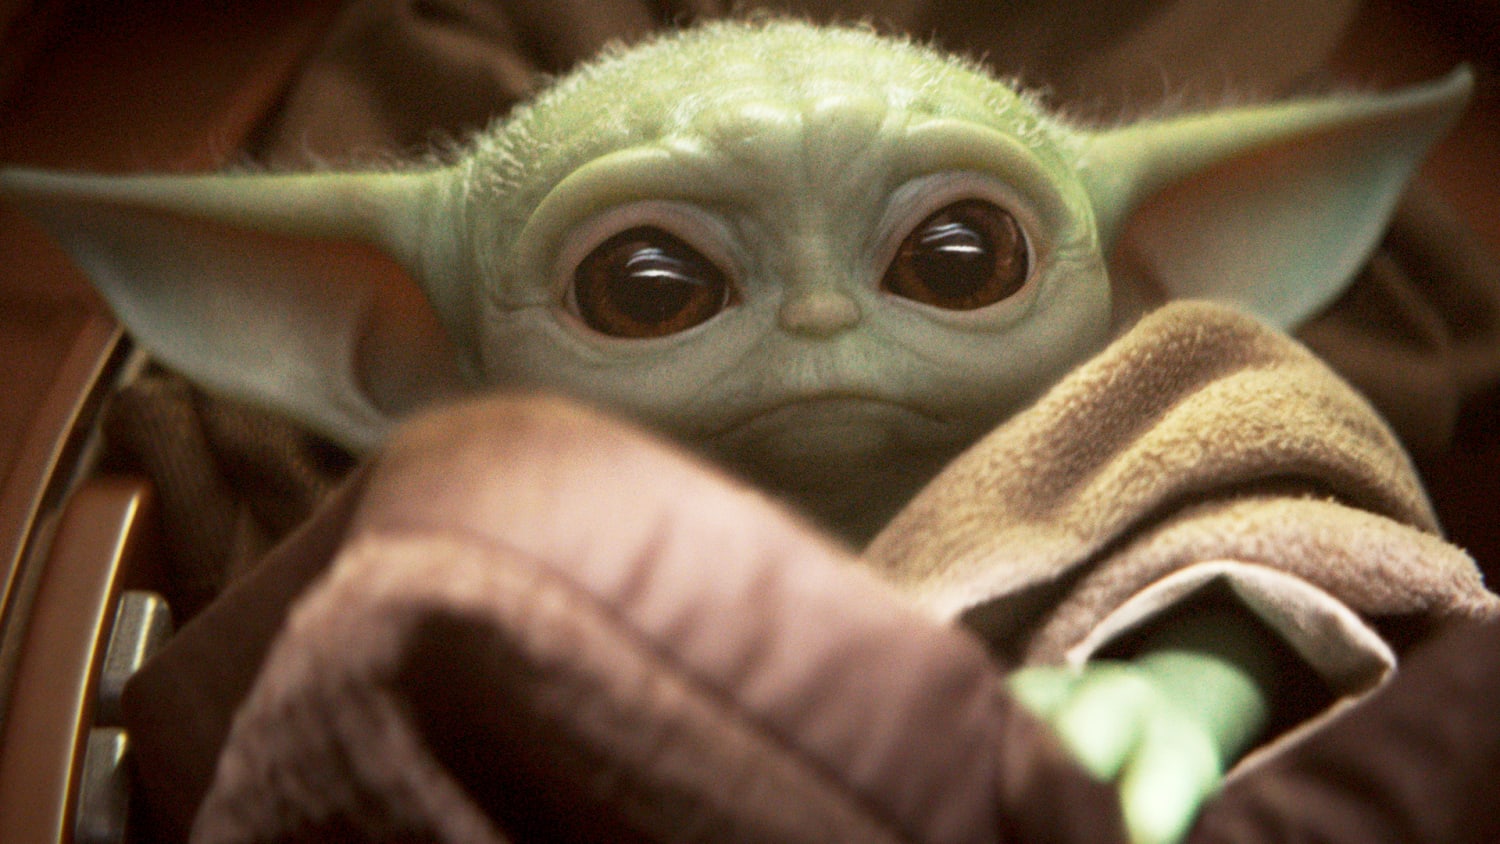 Baby Yoda Owns The Internet What Does That Mean For The Future Of Star Wars